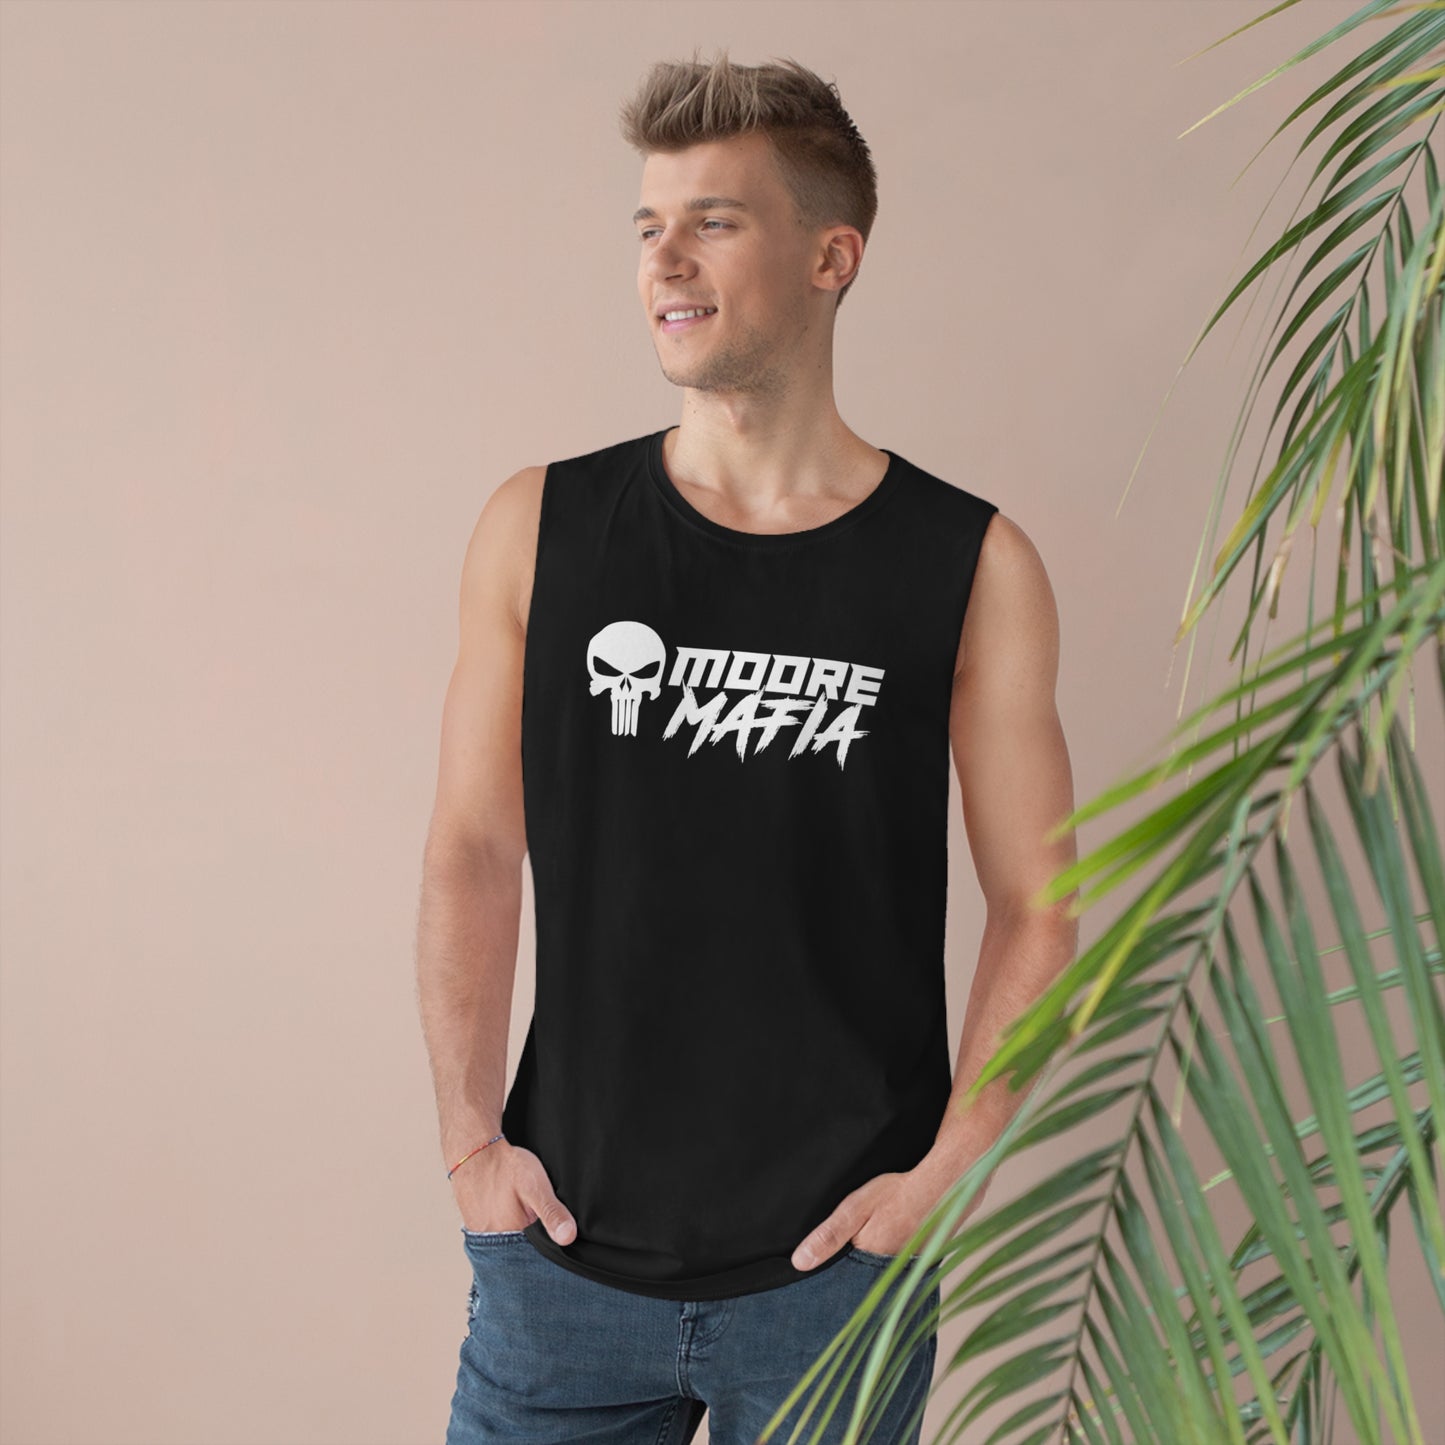 Mexican Flag Skull Unisex Muscle Tank